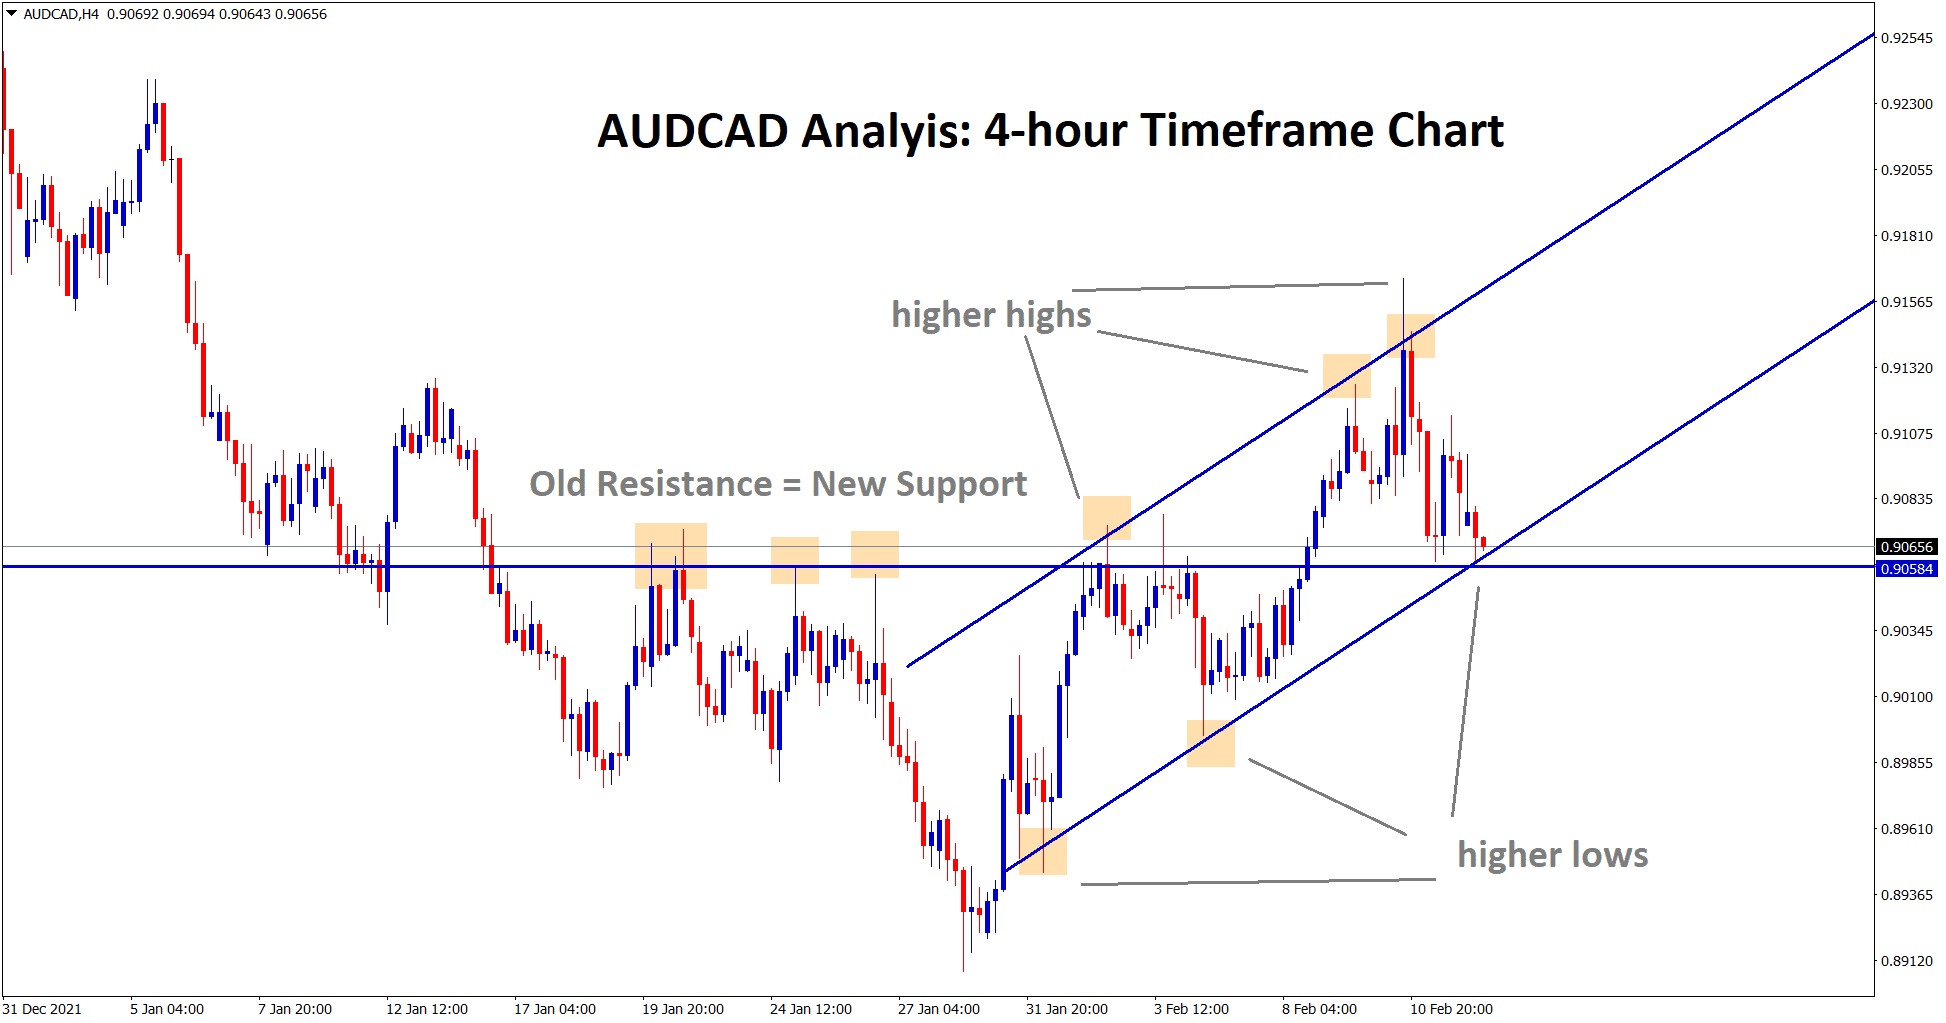 AUDCAD Analysis market at the higher low and old resistance area